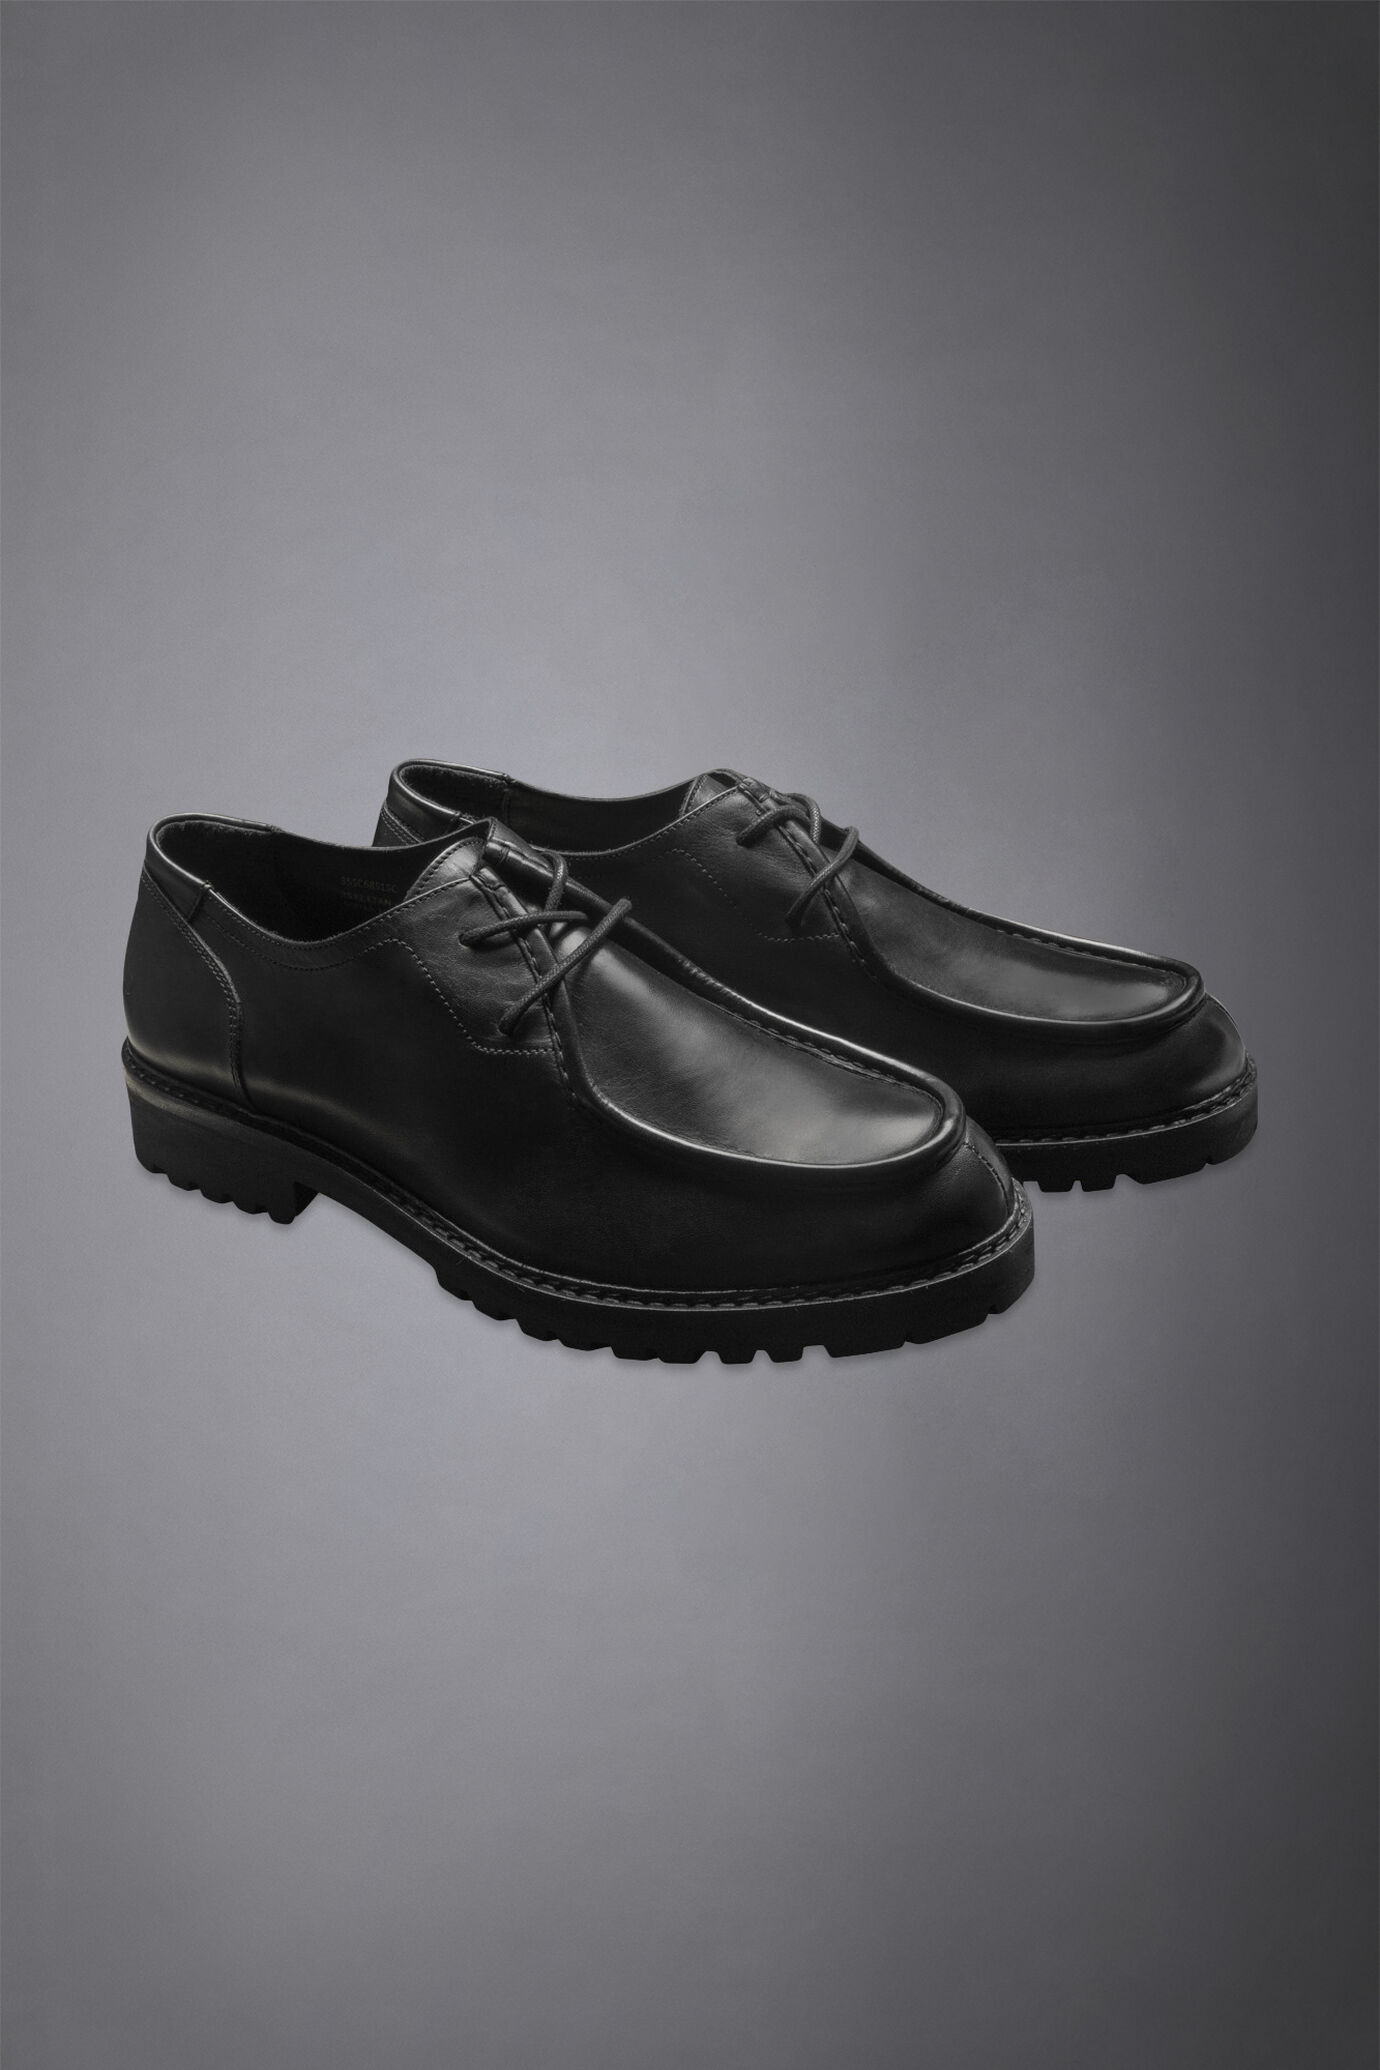 100% leather ranger shoe with rubber lug sole